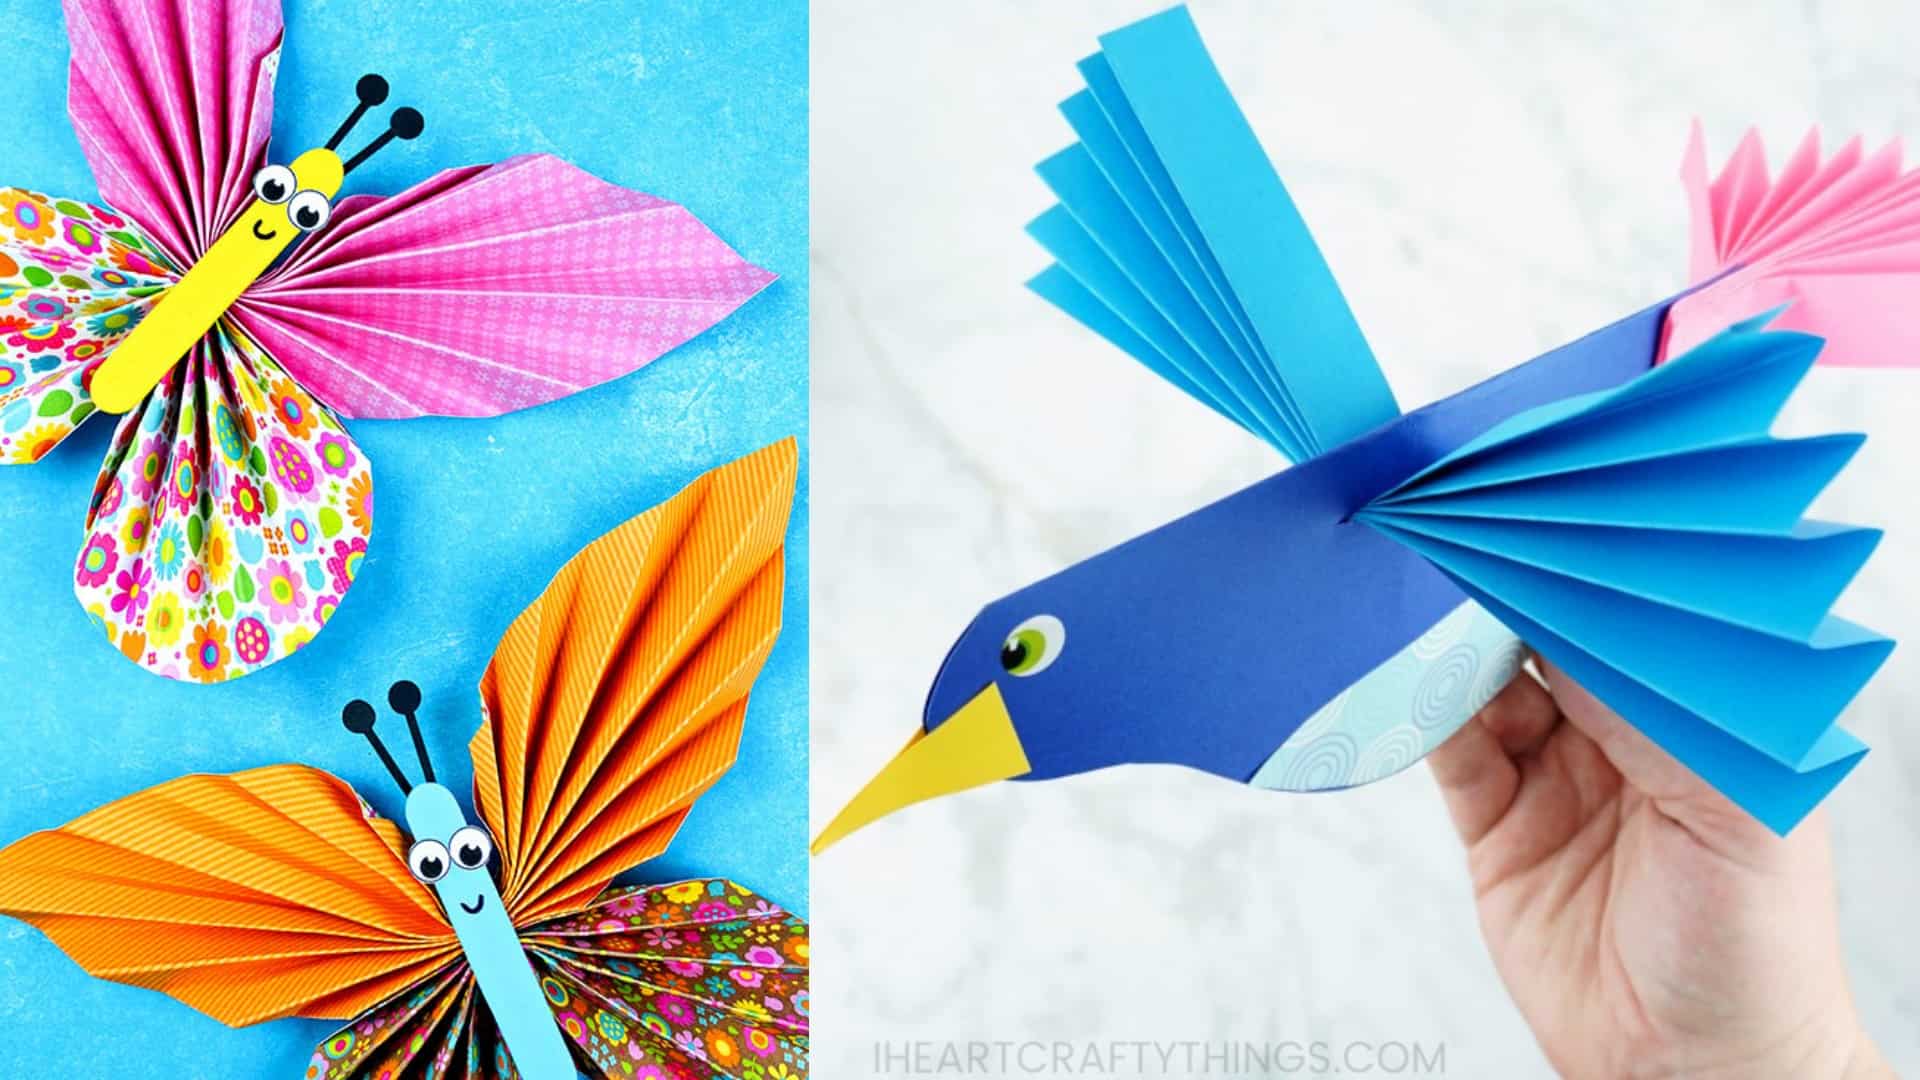 Paper Craft ideas for Kids - 7 simple crafts for kids 